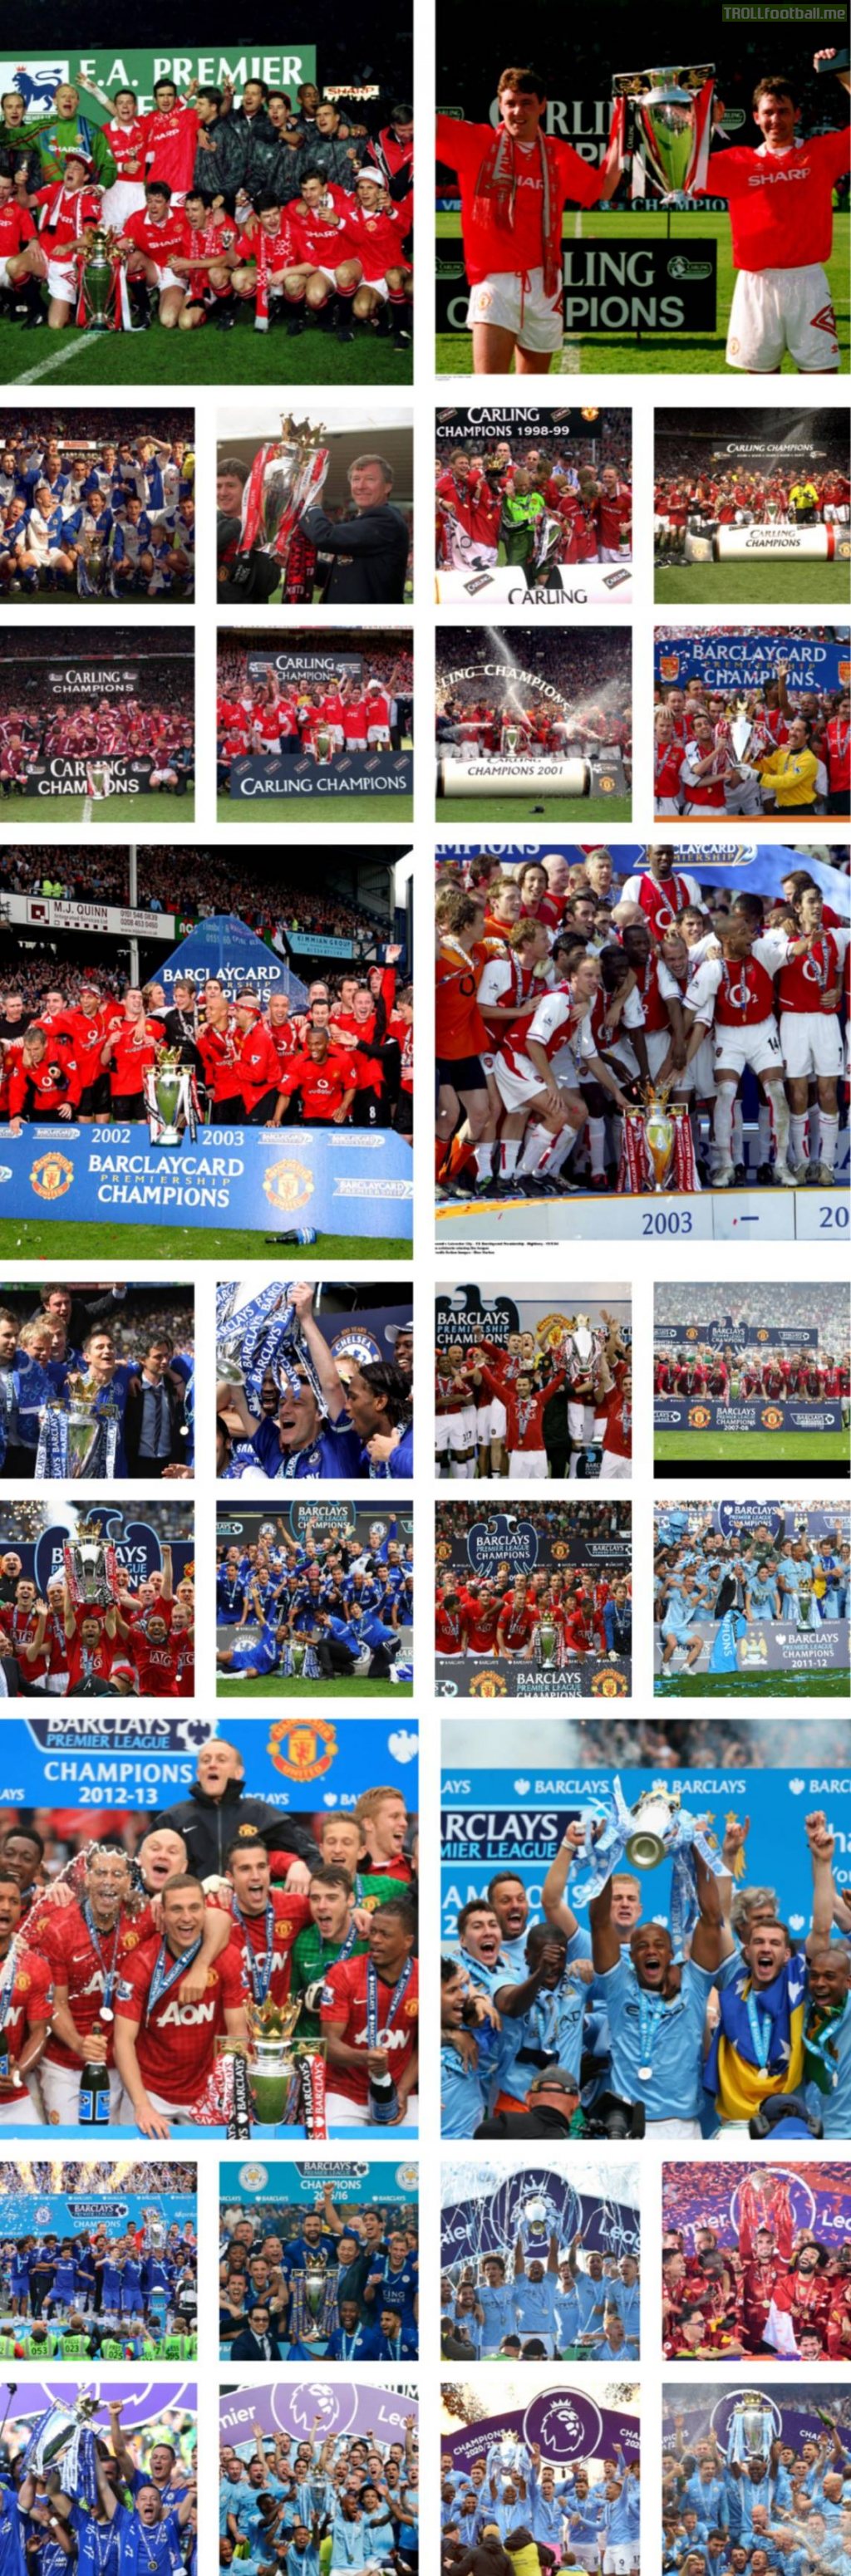 Ever since its inception in 1992, and over the course of 30 seasons, 7 clubs have won the English Premier League. All of them wore either blue or red as their main kit colour